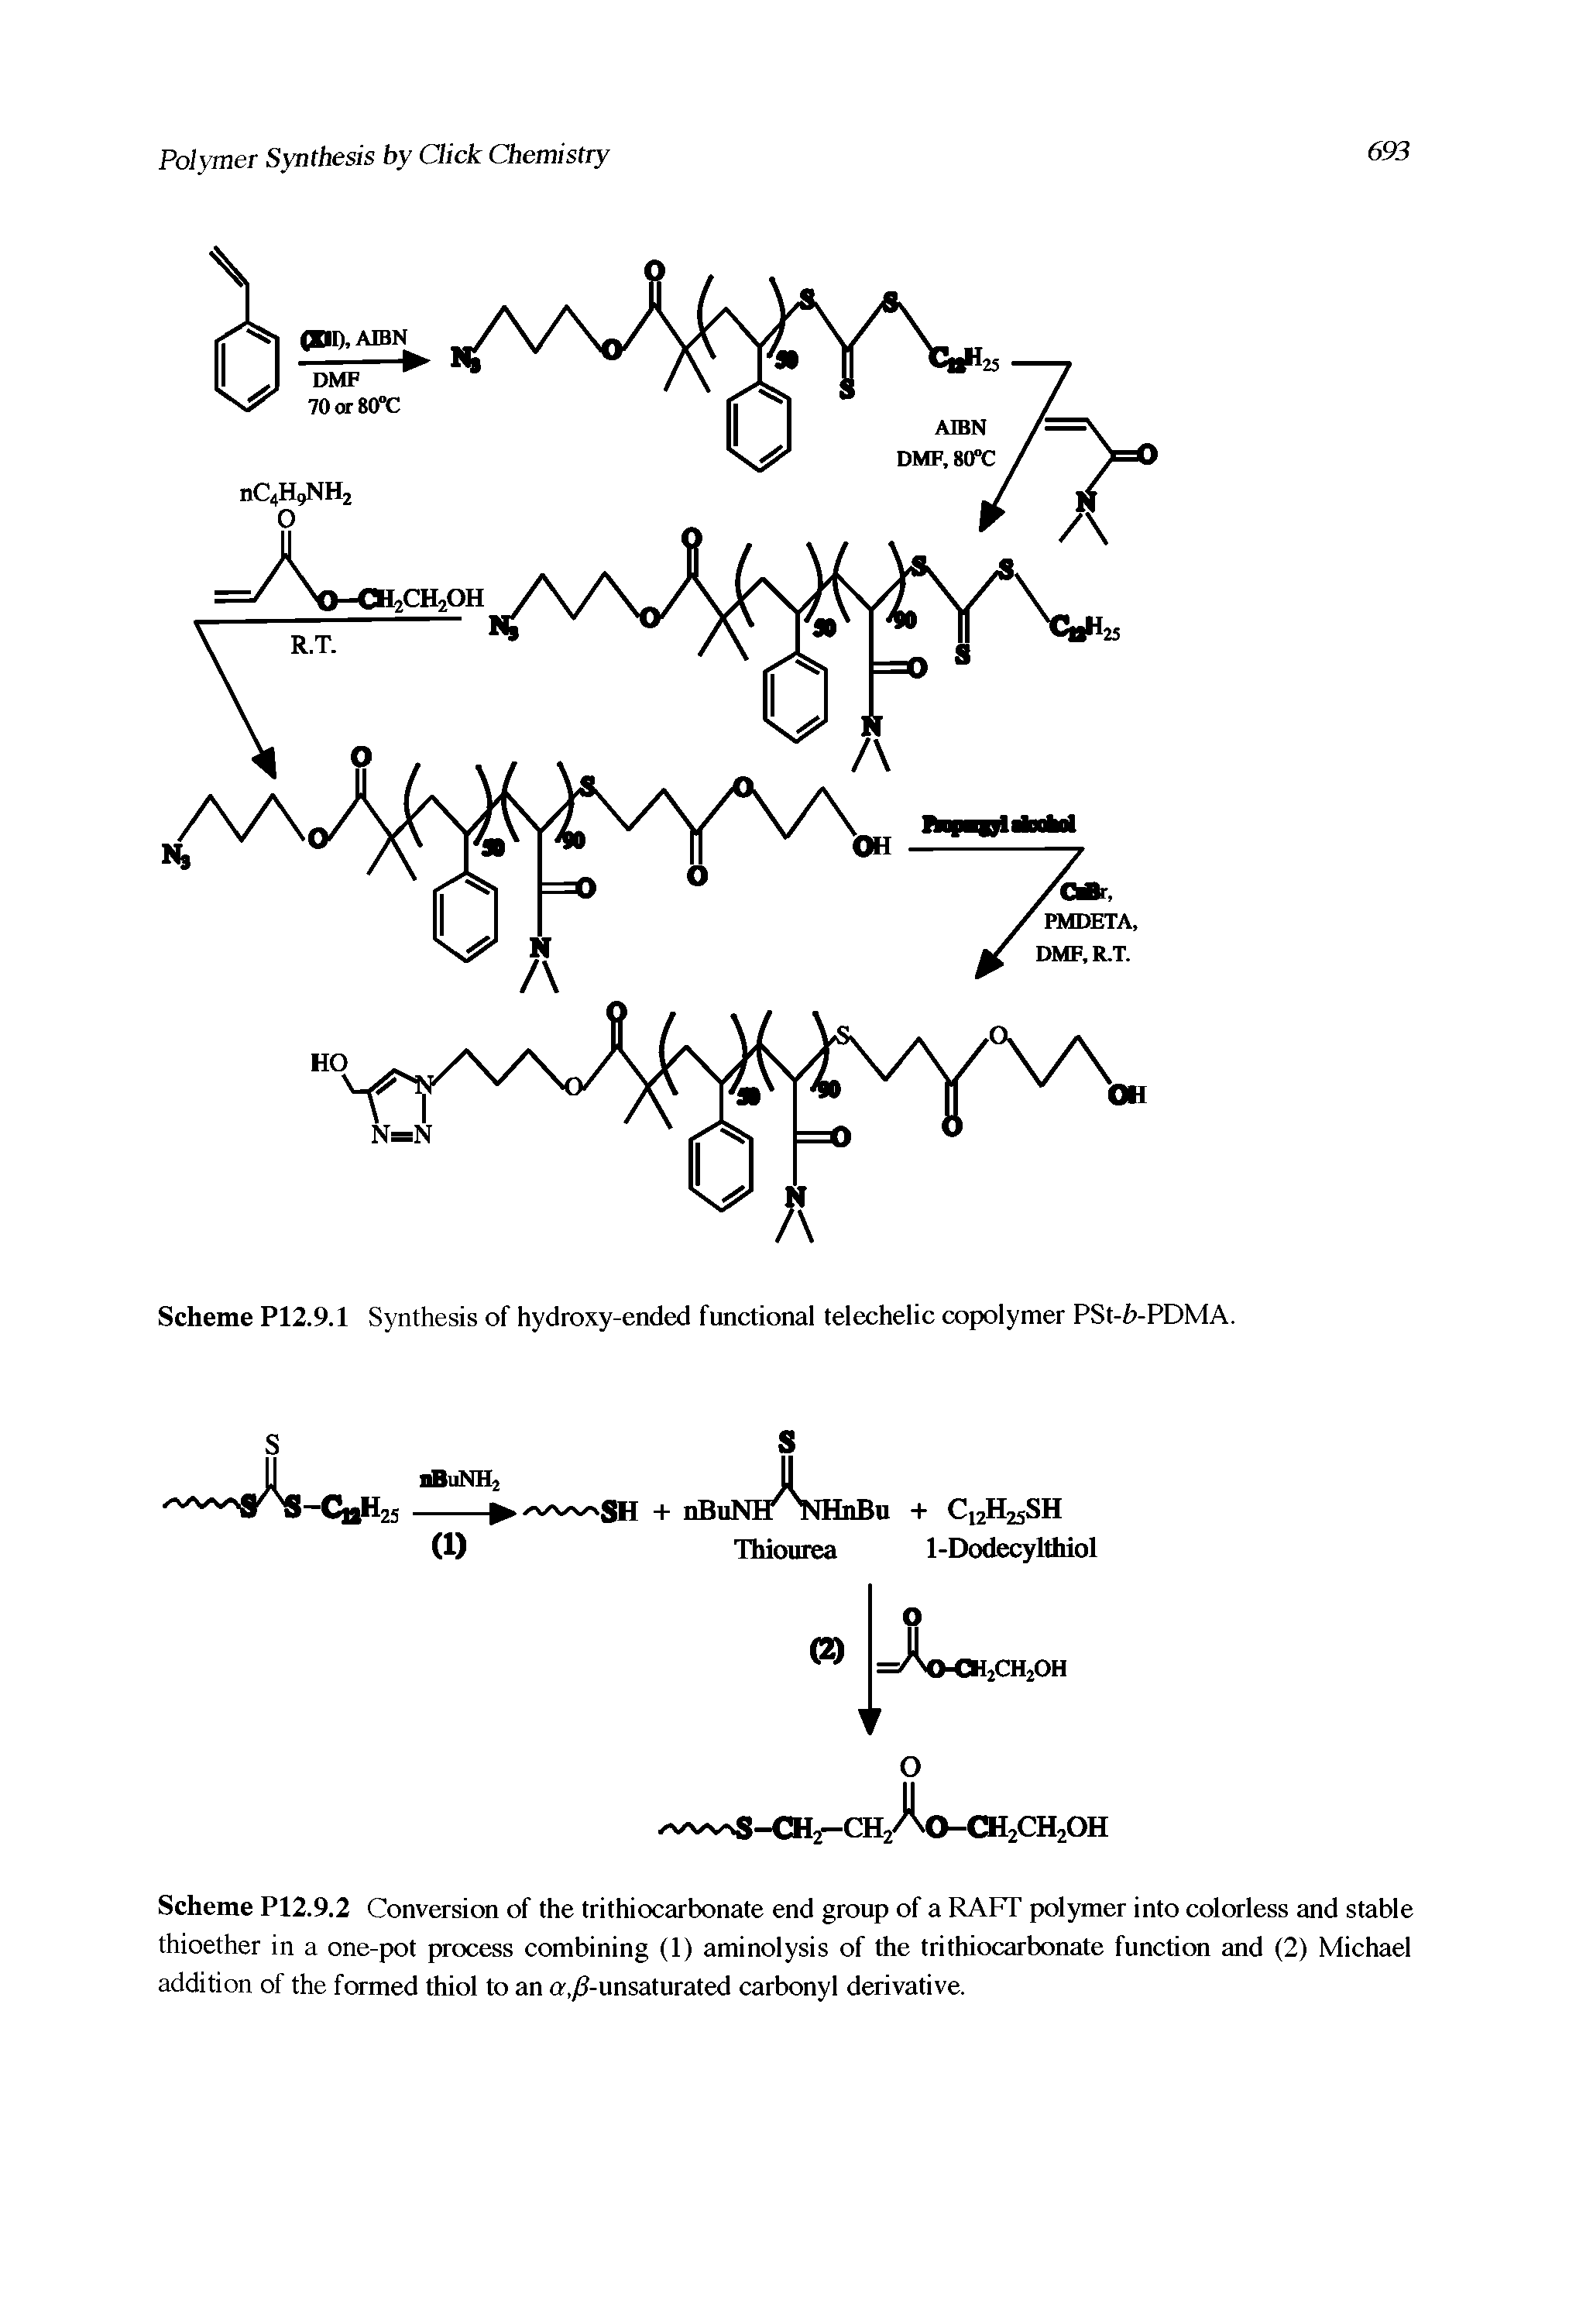 Scheme P12.9.2 Conversion of the trithioccabonate end group of a RAFT polymer into colorless and stable thioether in a one-pot process combining (1) aminolysis of the trithiocarbonate function and (2) Michael addition of the formed thiol to an cr. -unsaturated carbonyl derivative.